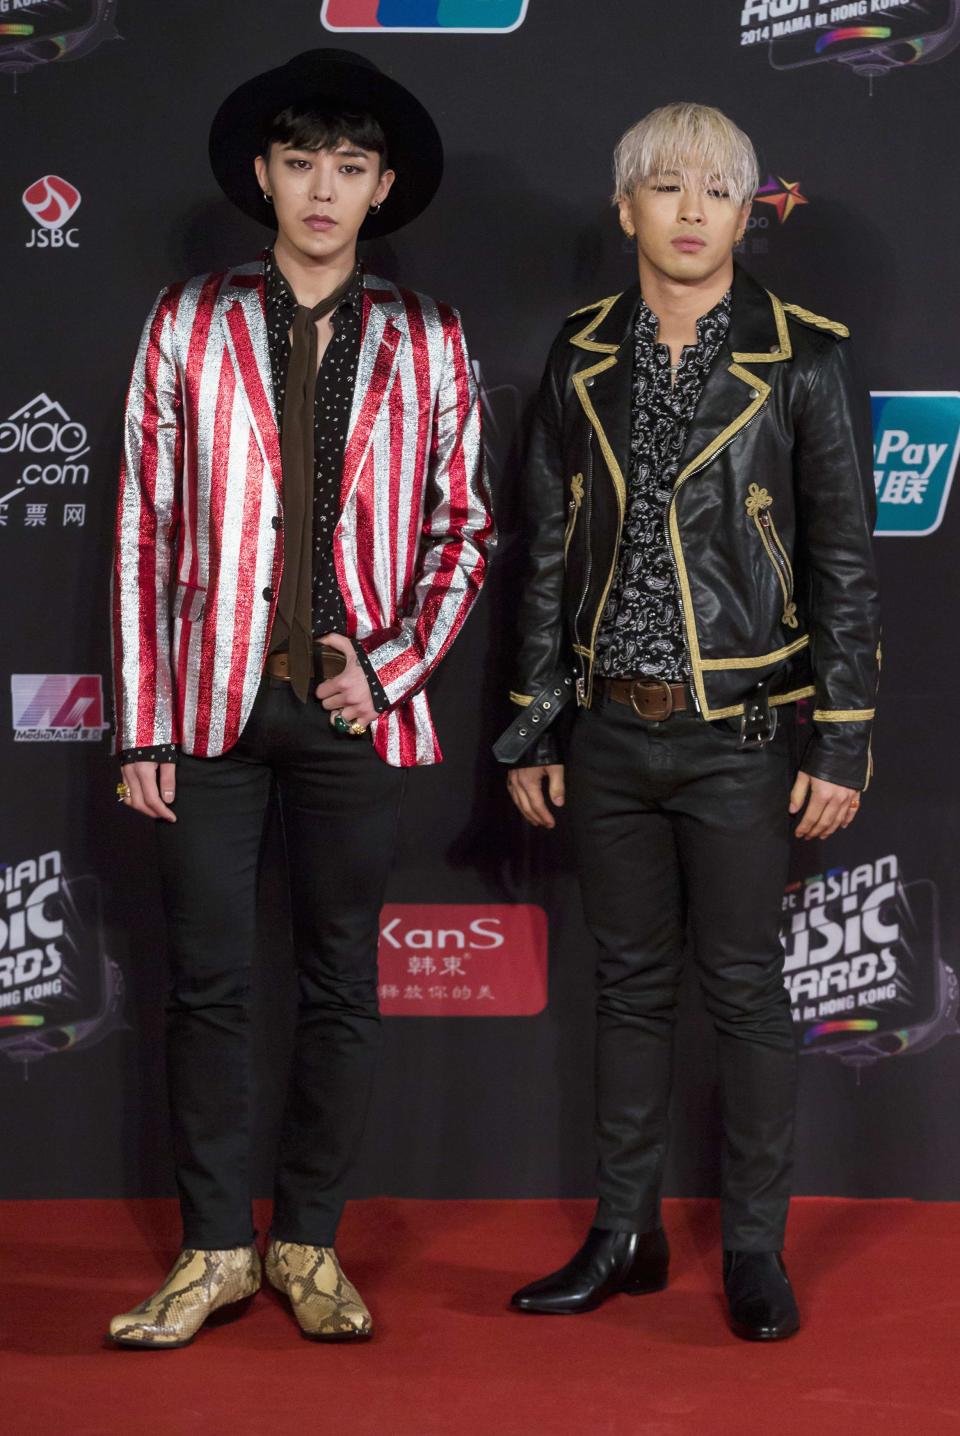 Members of South Korean K-Pop idol group Big Bang, Kwon Ji-yong, stage name G-Dragon and Dong Young-Bae, stage name Taeyang, pose on the red carpet as they attend the 2014 Mnet Asian Music Awards (MAMA) in Hong Kong